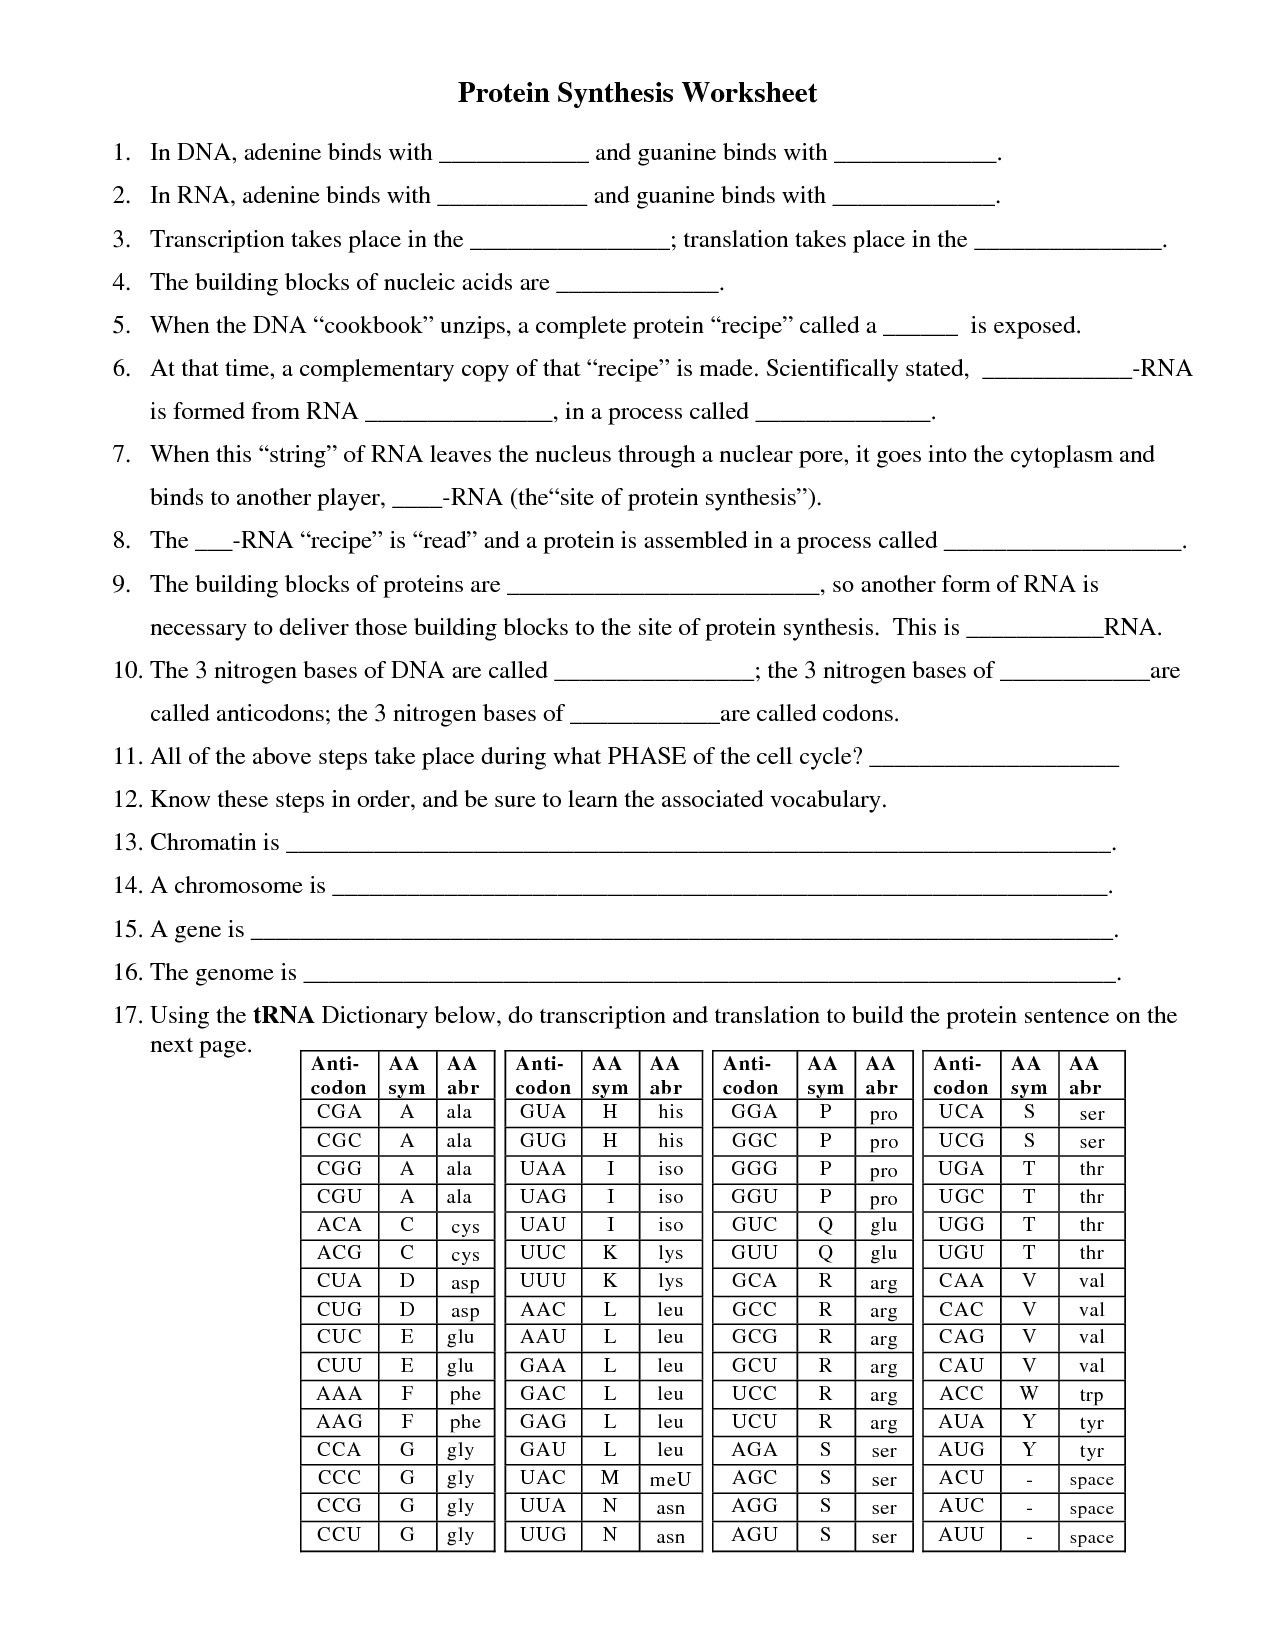 Protein Synthesis Practice Worksheet Prime Dna and Protein Synthesis Worksheet Answers